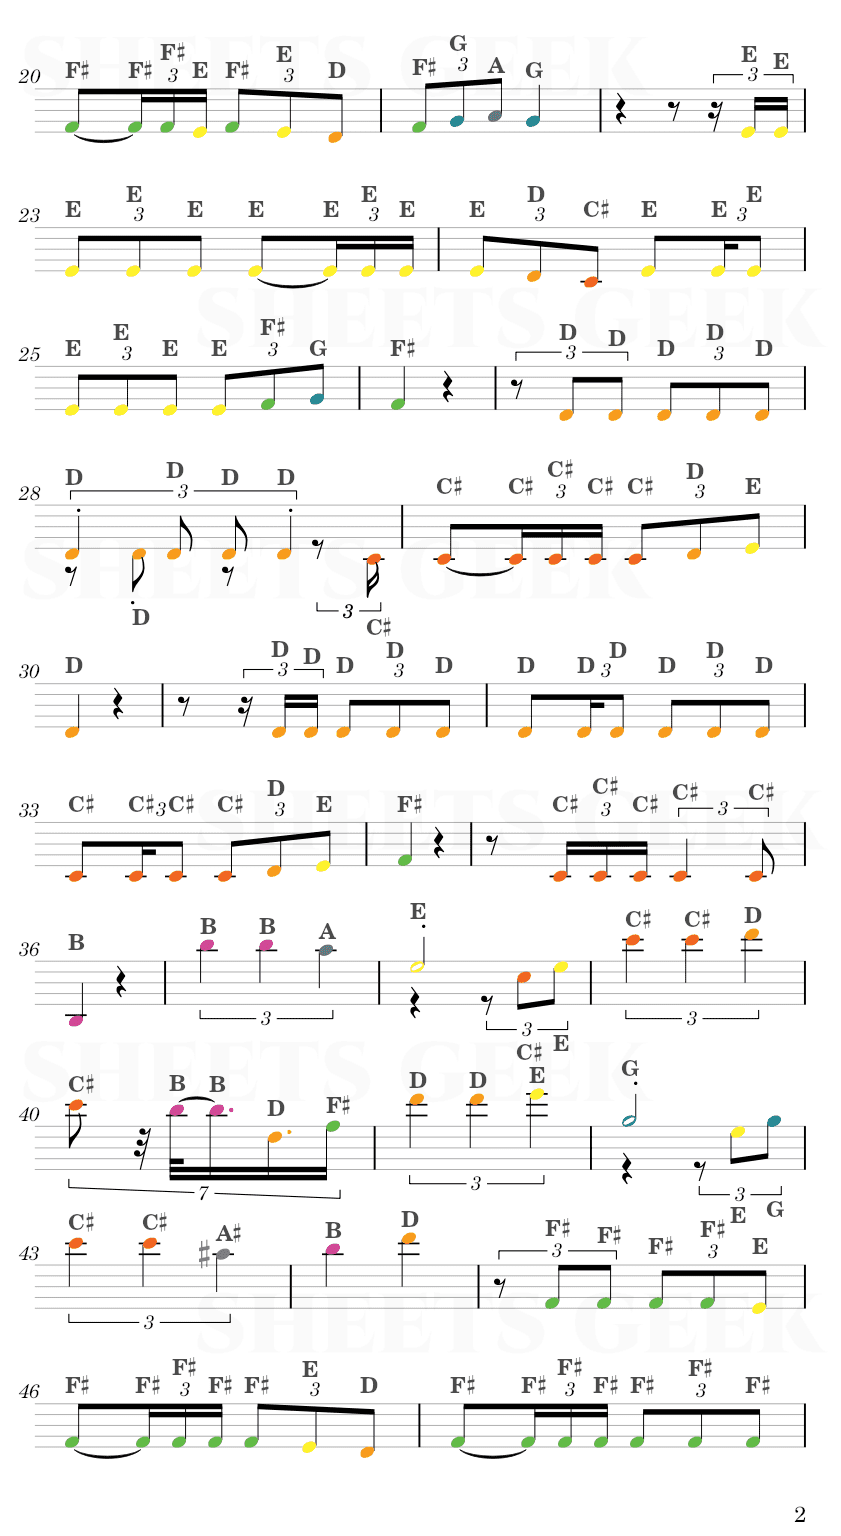 Mistral Gagnant - Renaud Easy Sheet Music Free for piano, keyboard, flute, violin, sax, cello page 2